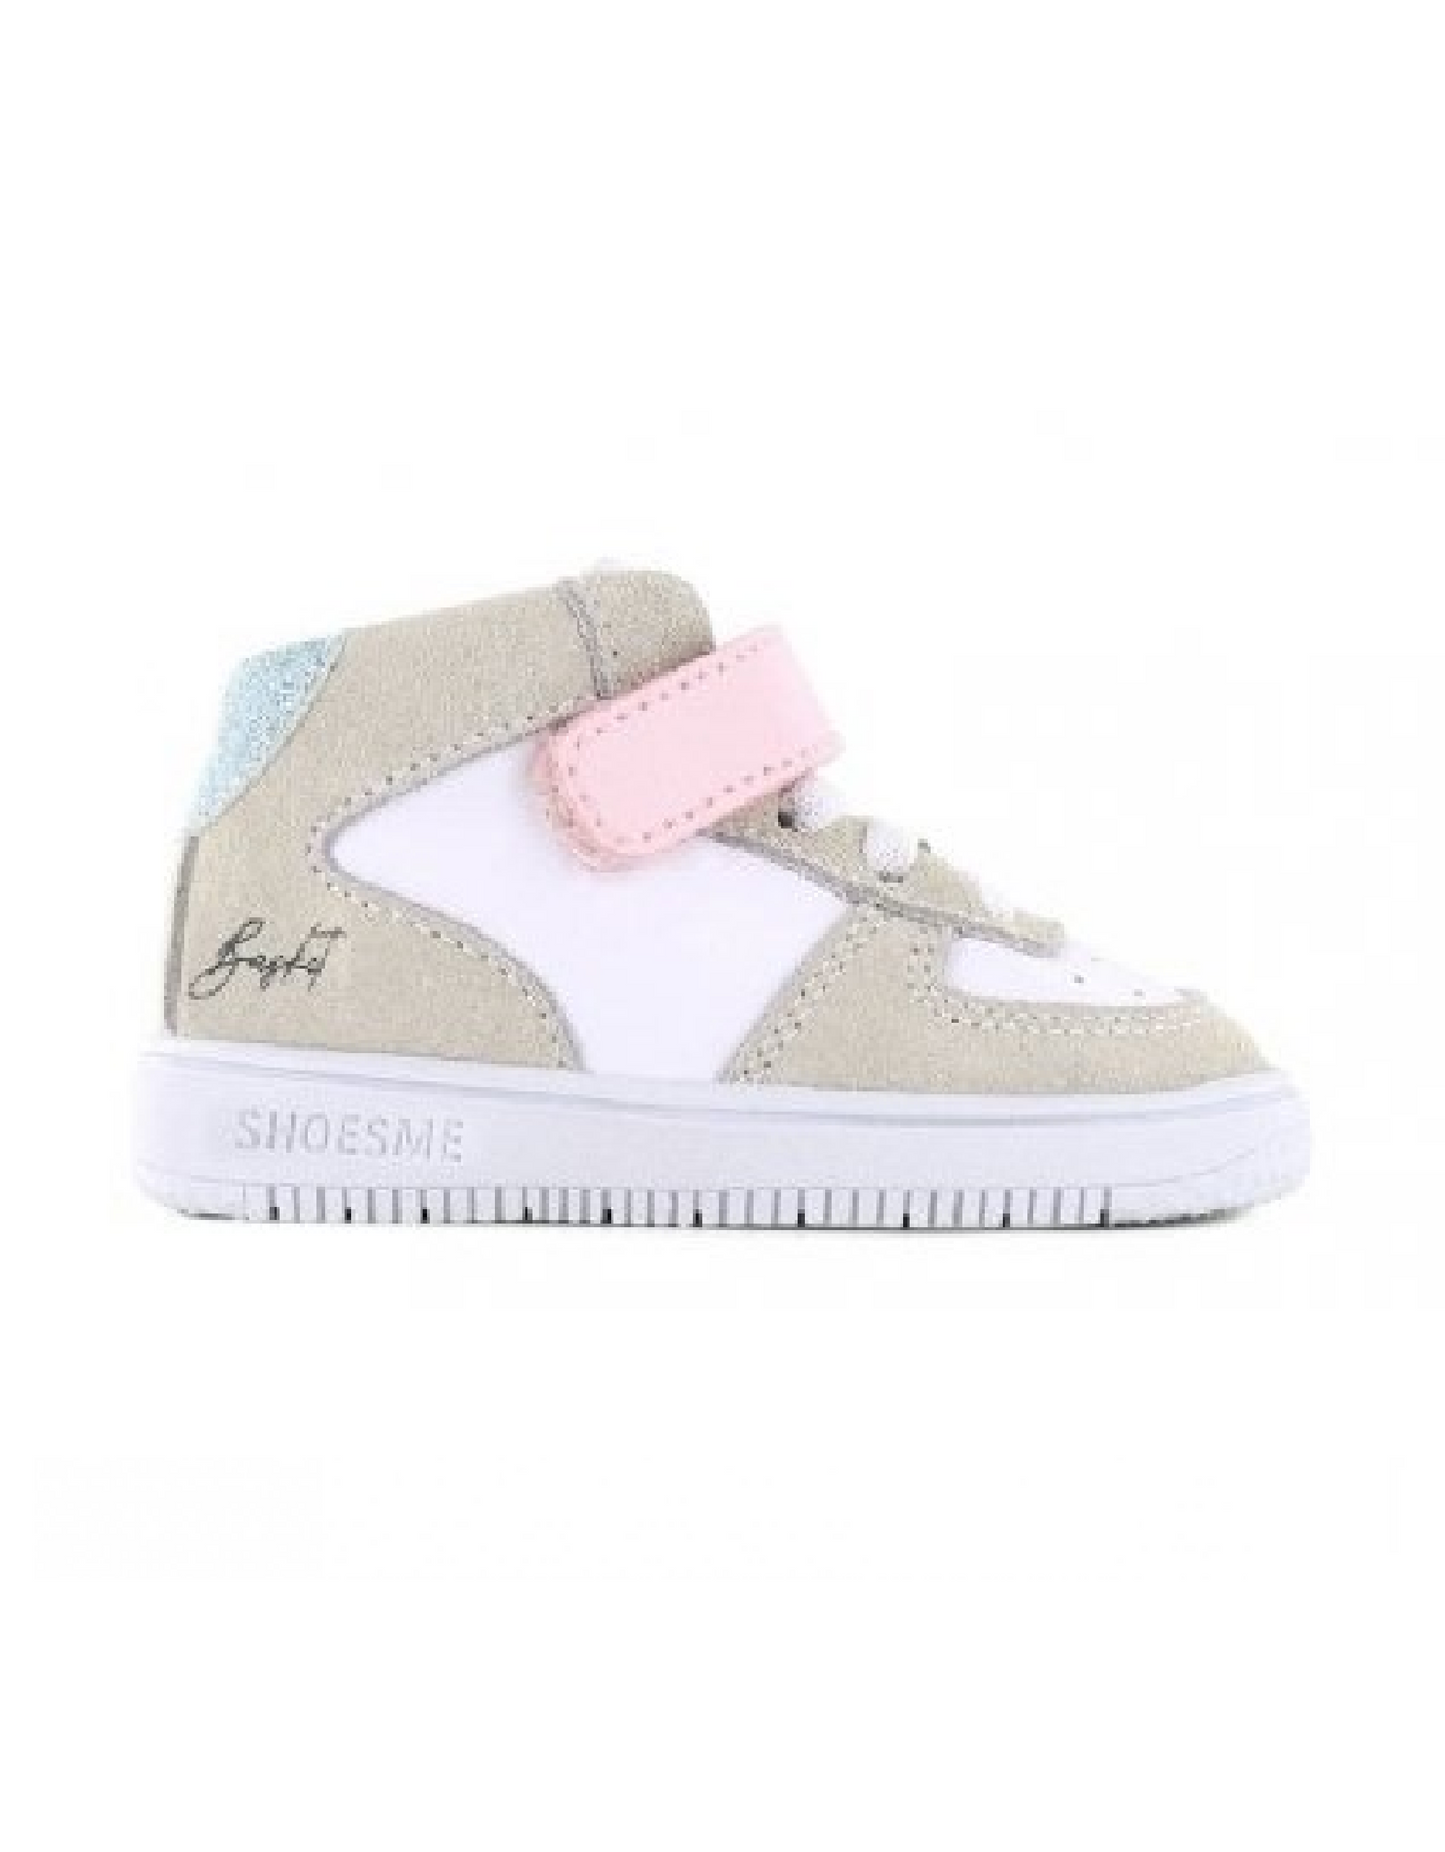 Shoesme BN23S001 A Beige White Pink